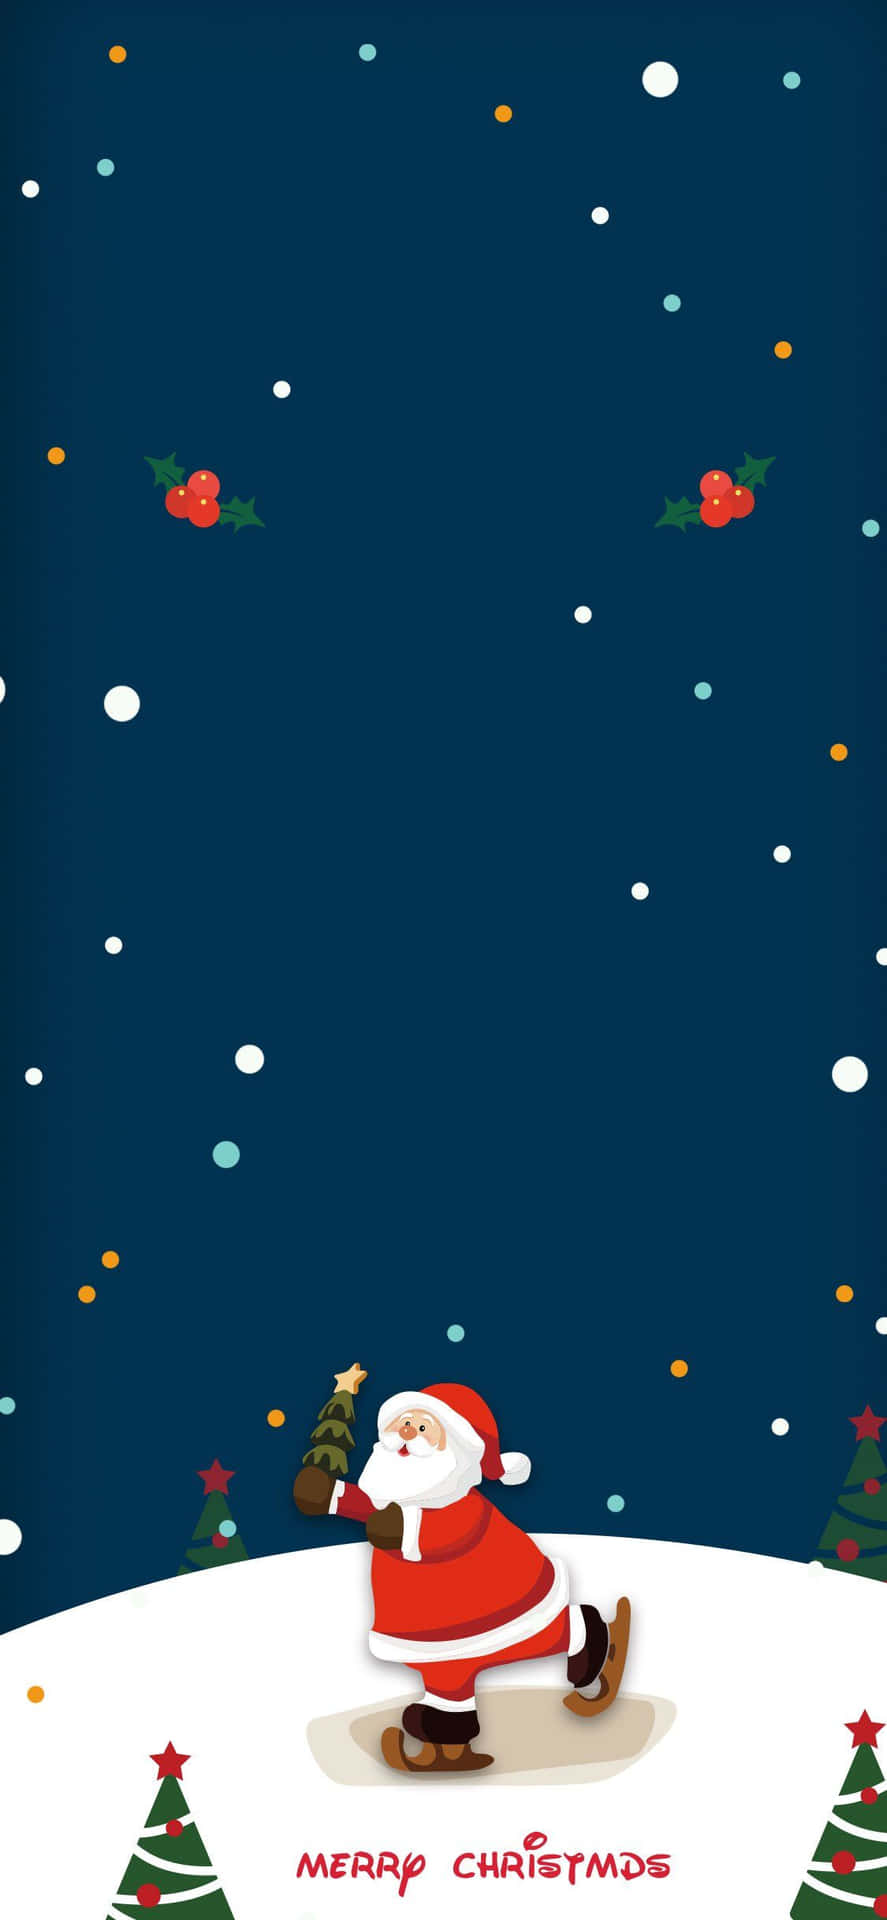 Add some cheer to your Christmas with this festive and fun iPhone wallpaper. Wallpaper